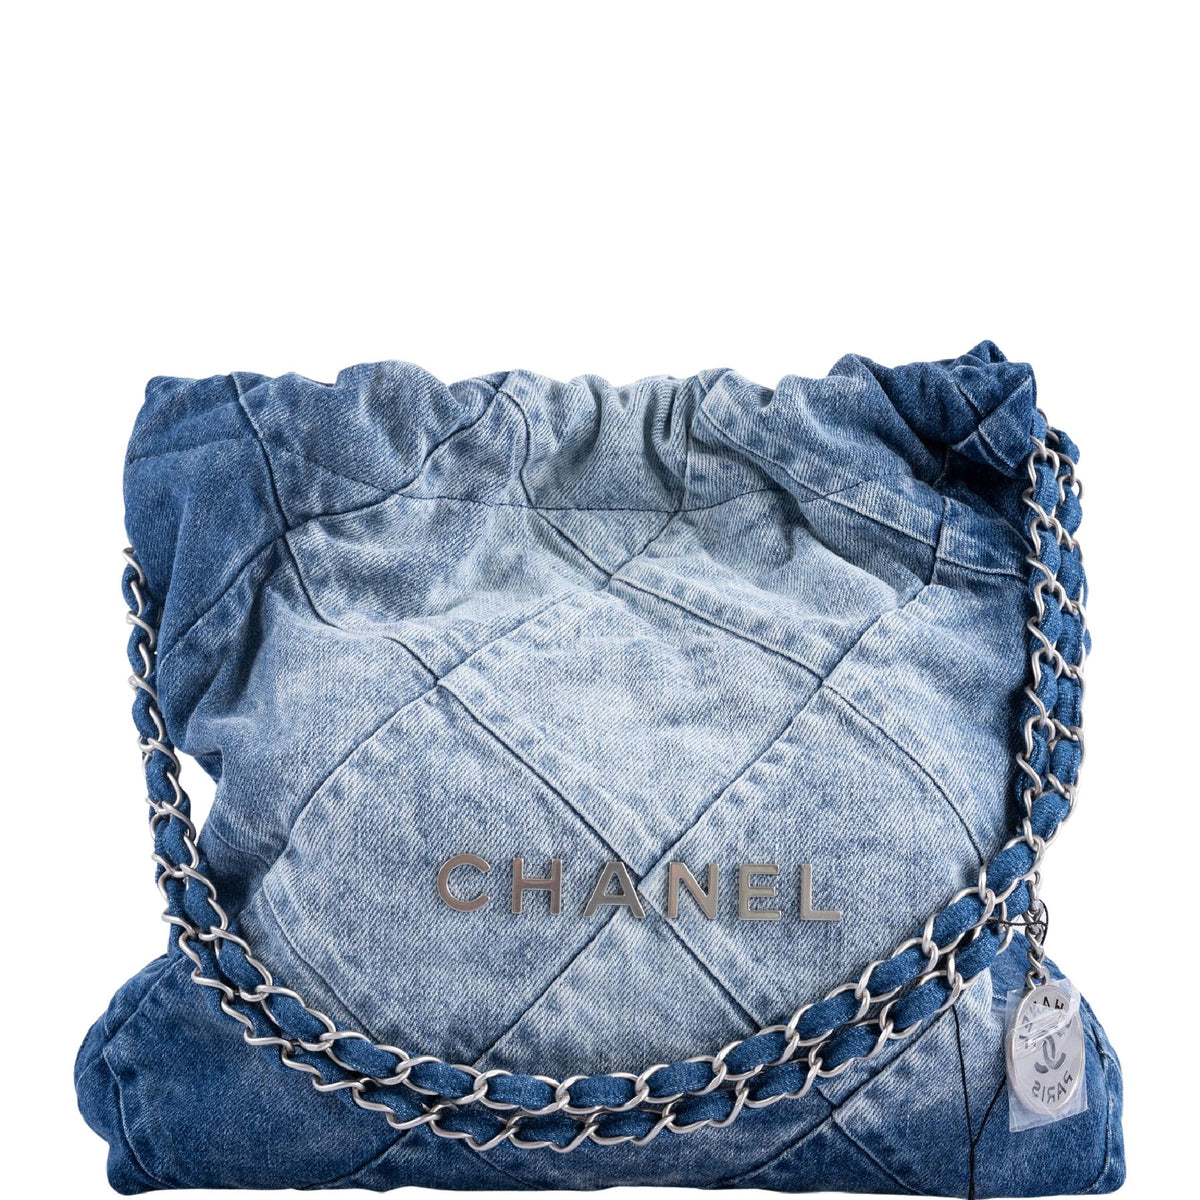 Chanel Denim Tote Bag (The Gate Never fails) #thegate #thefence